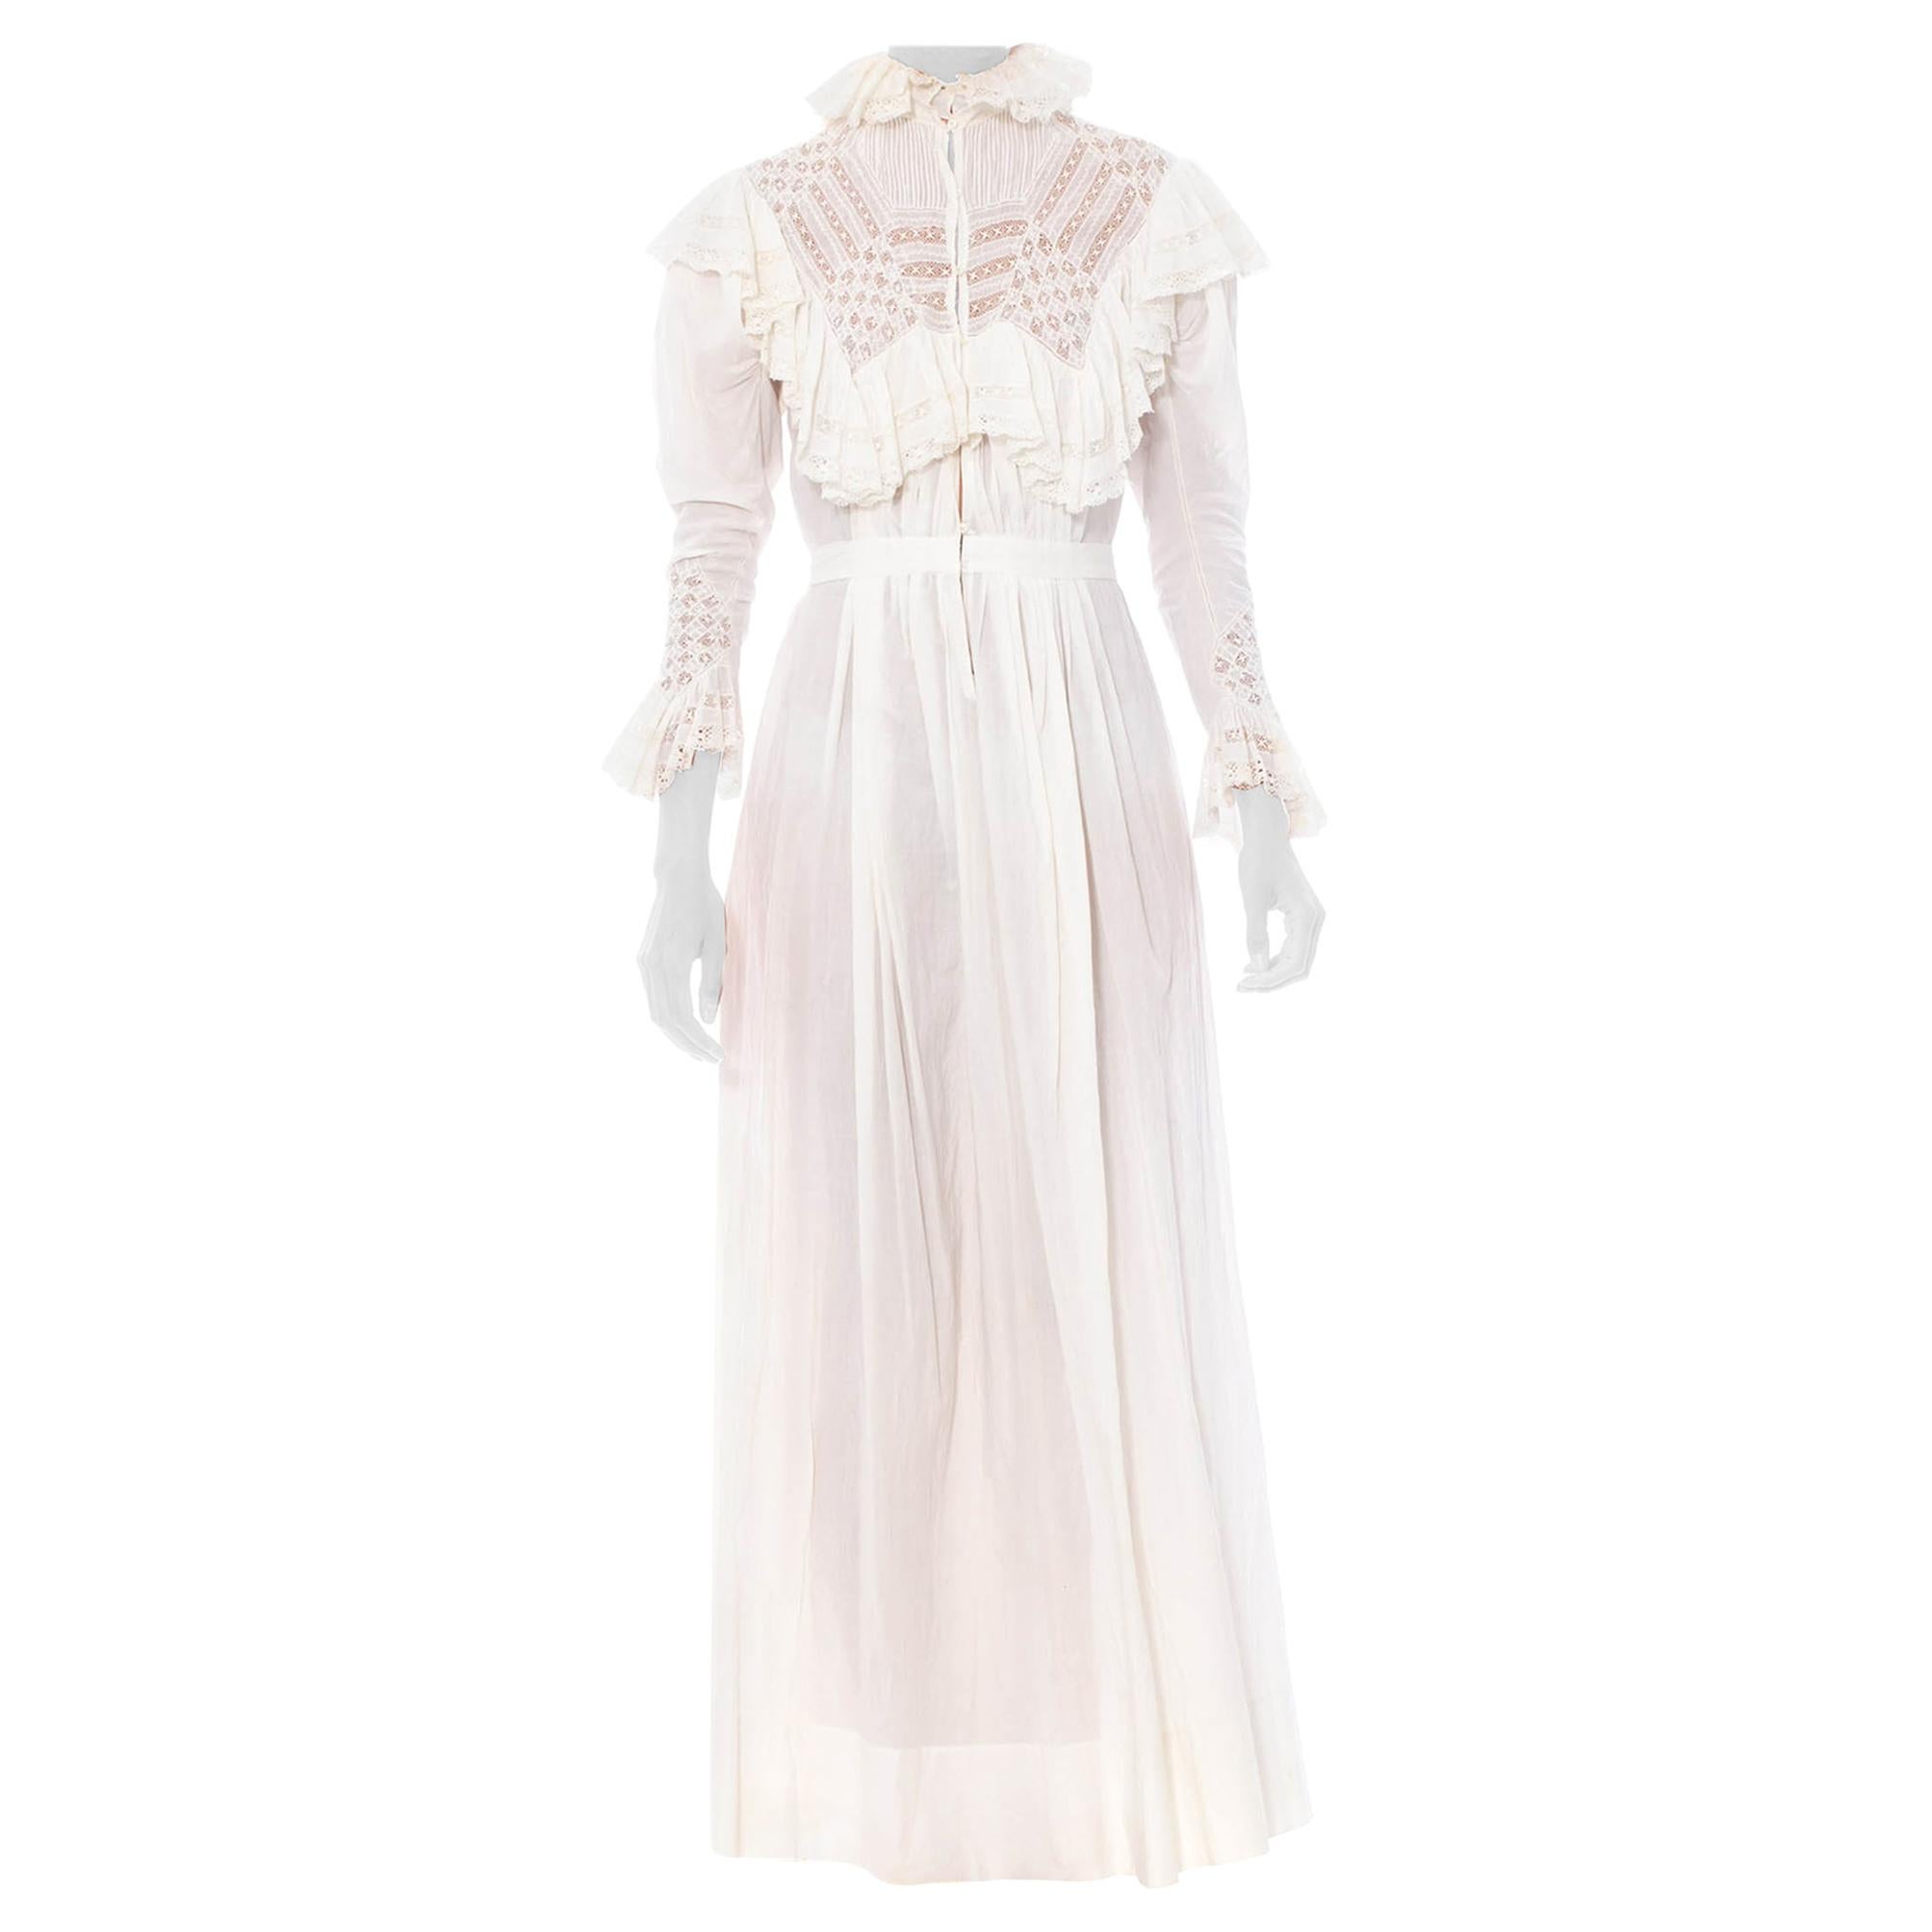 Victorian White Organic Cotton & Lace Belle Epoch Sleeve House Dress With Sash 